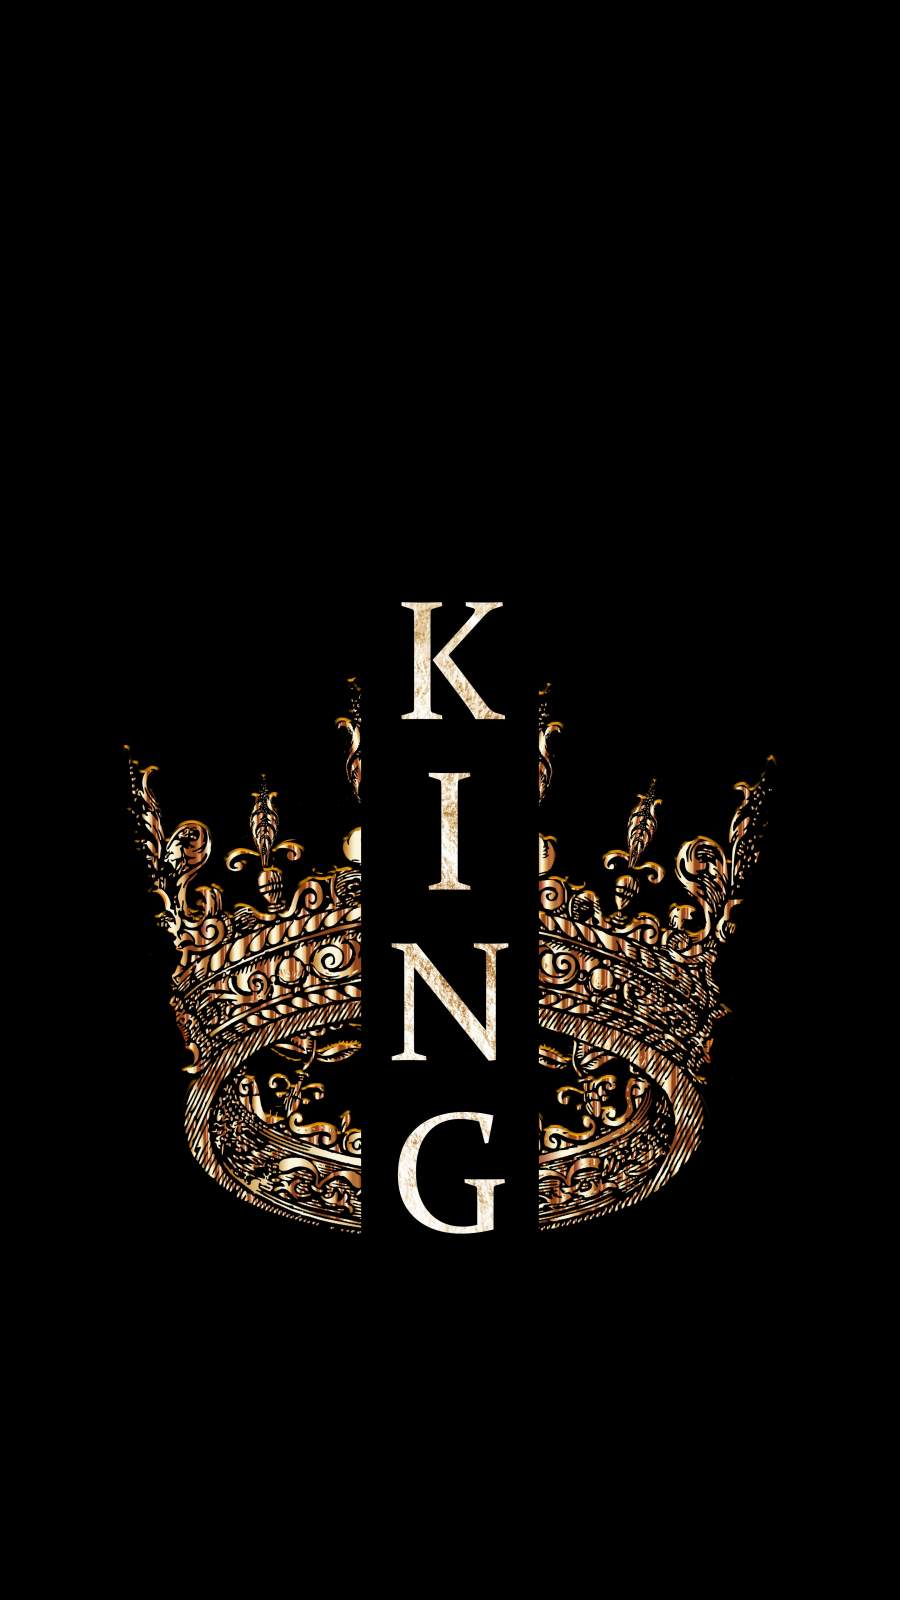 KING Crown IPhone Wallpaper - IPhone Wallpapers : iPhone Wallpapers